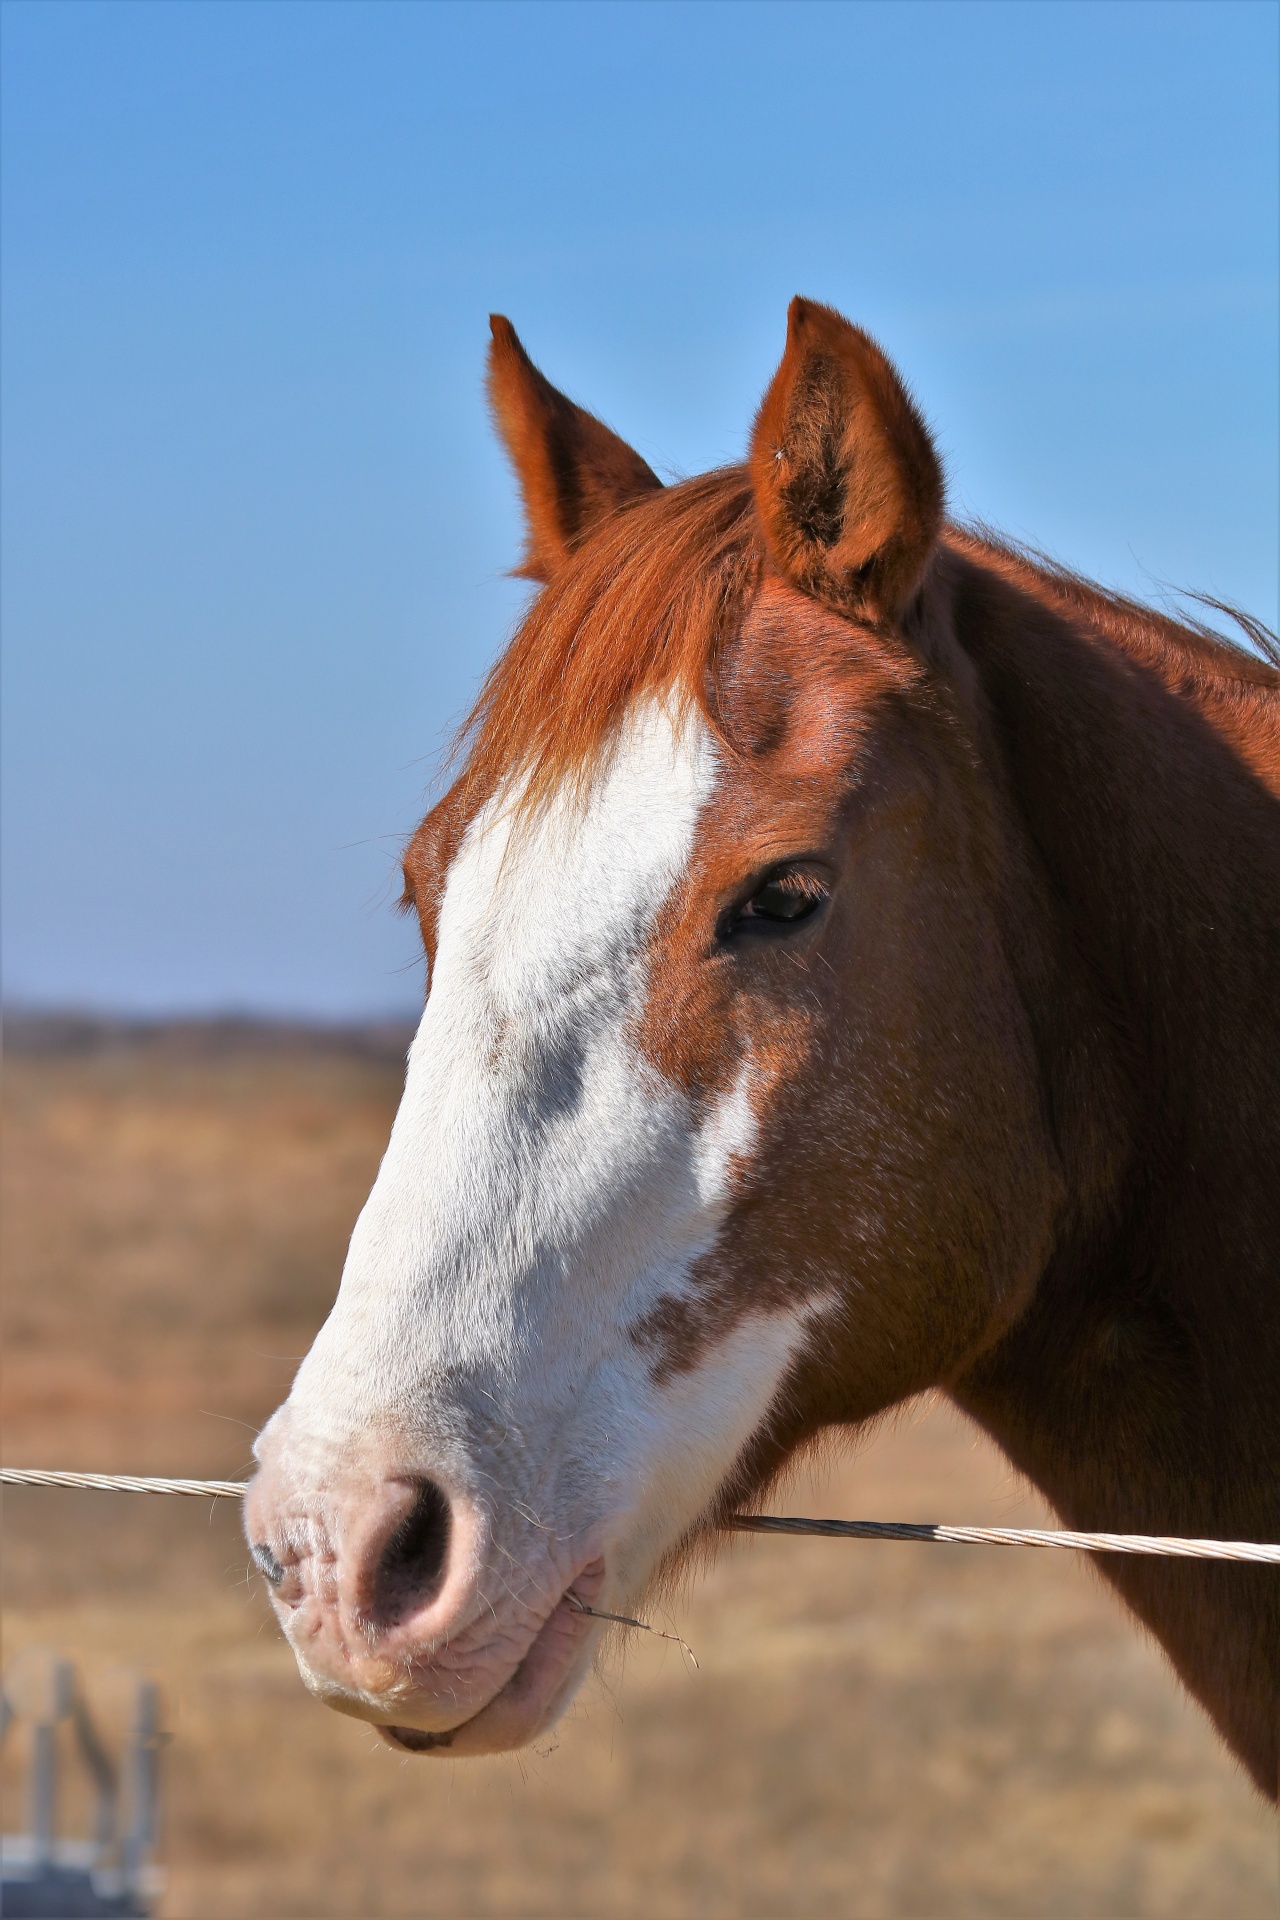 Close-up portrait of a red sorrel horse with a white face on a blue sky background.